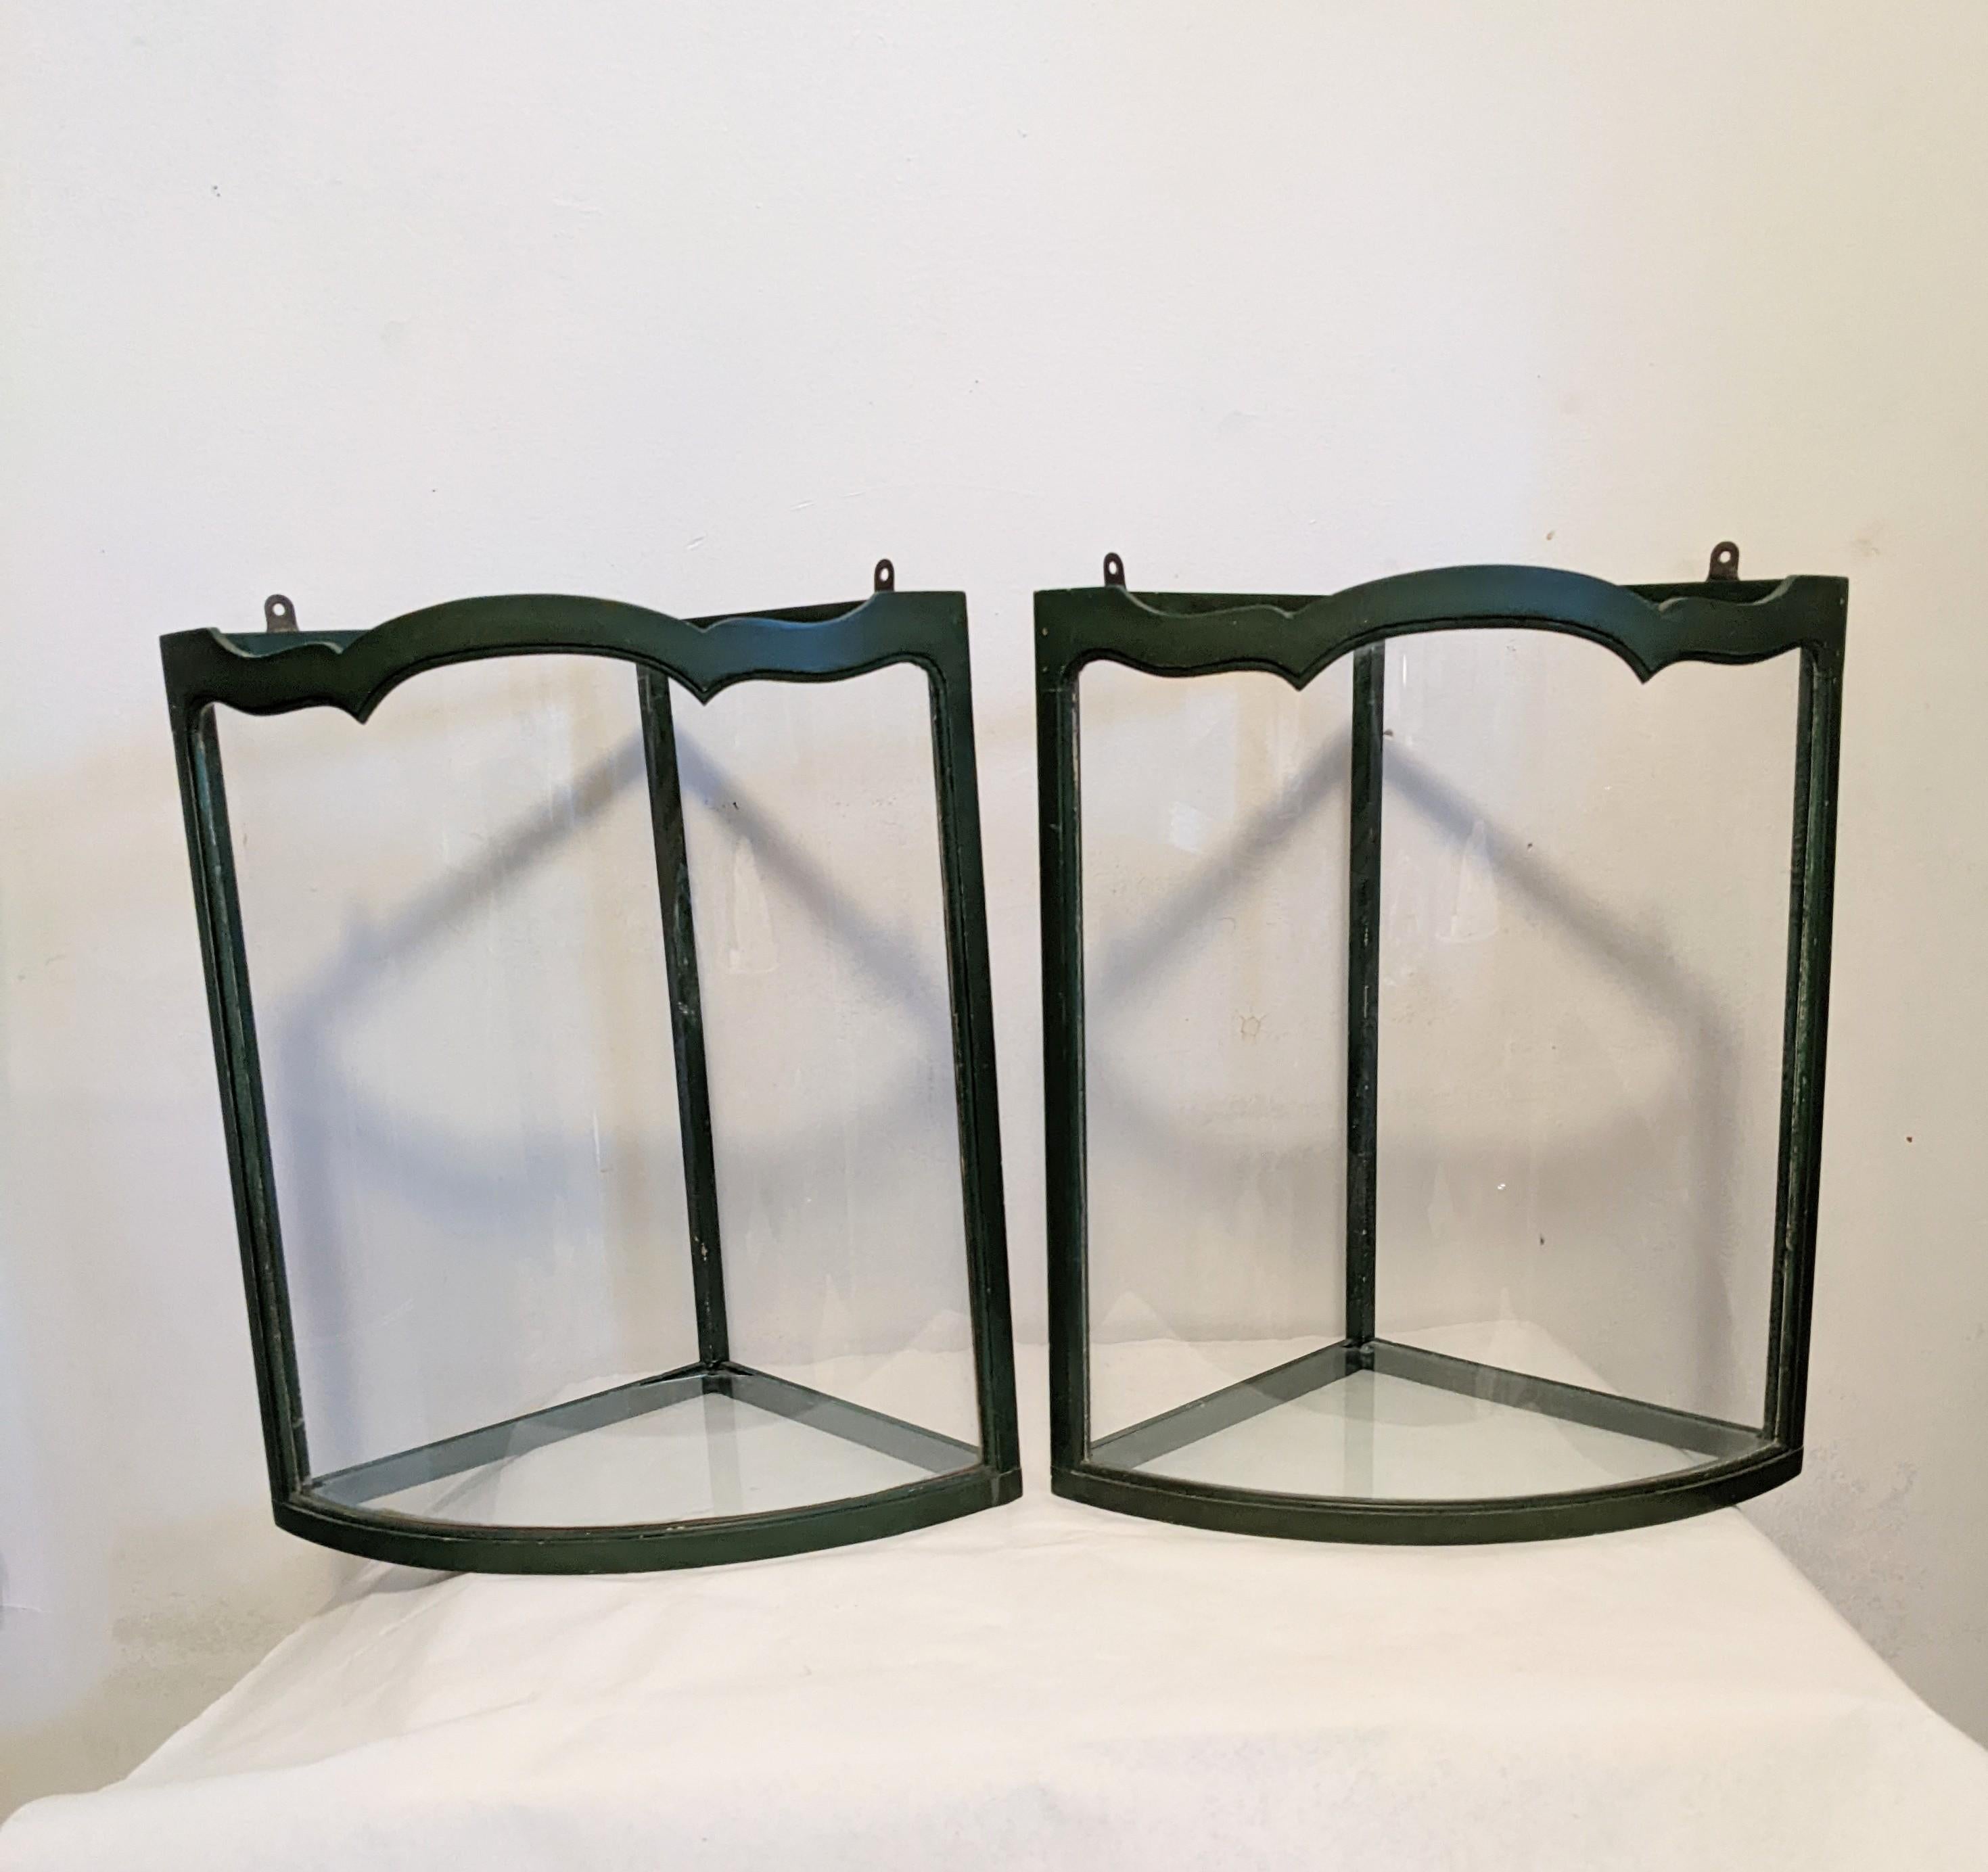 Charming Art Deco corner vitrines or photophores for objects or candles. Painted and carved wood frame in deep green with carved glass. 1930's USA. 
Each 14.5 high, 13